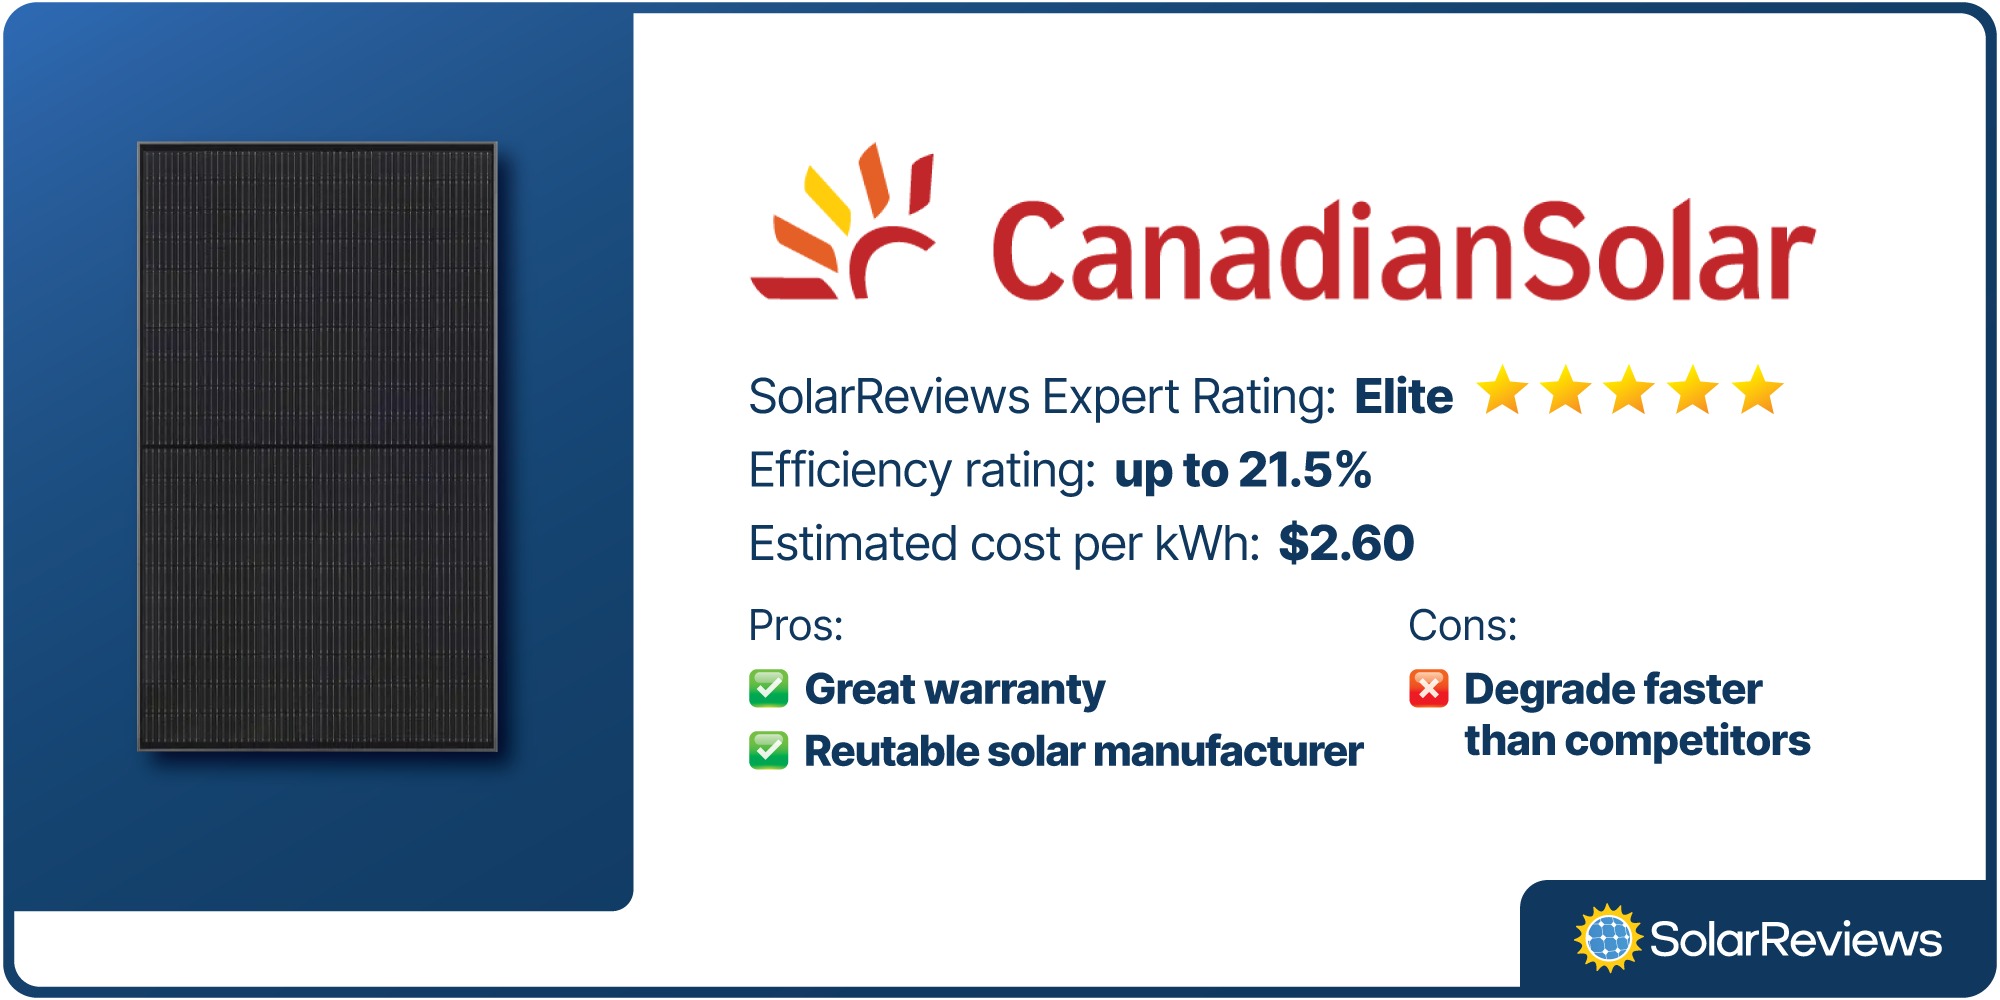 Number two on our list for best cheap solar panels is Canadian Solar. This panel has an Elite rating from SolarReviews' experts and an efficiency rating up to 21.5%. The cost for this panel comes in at about $2.60 per kWh.